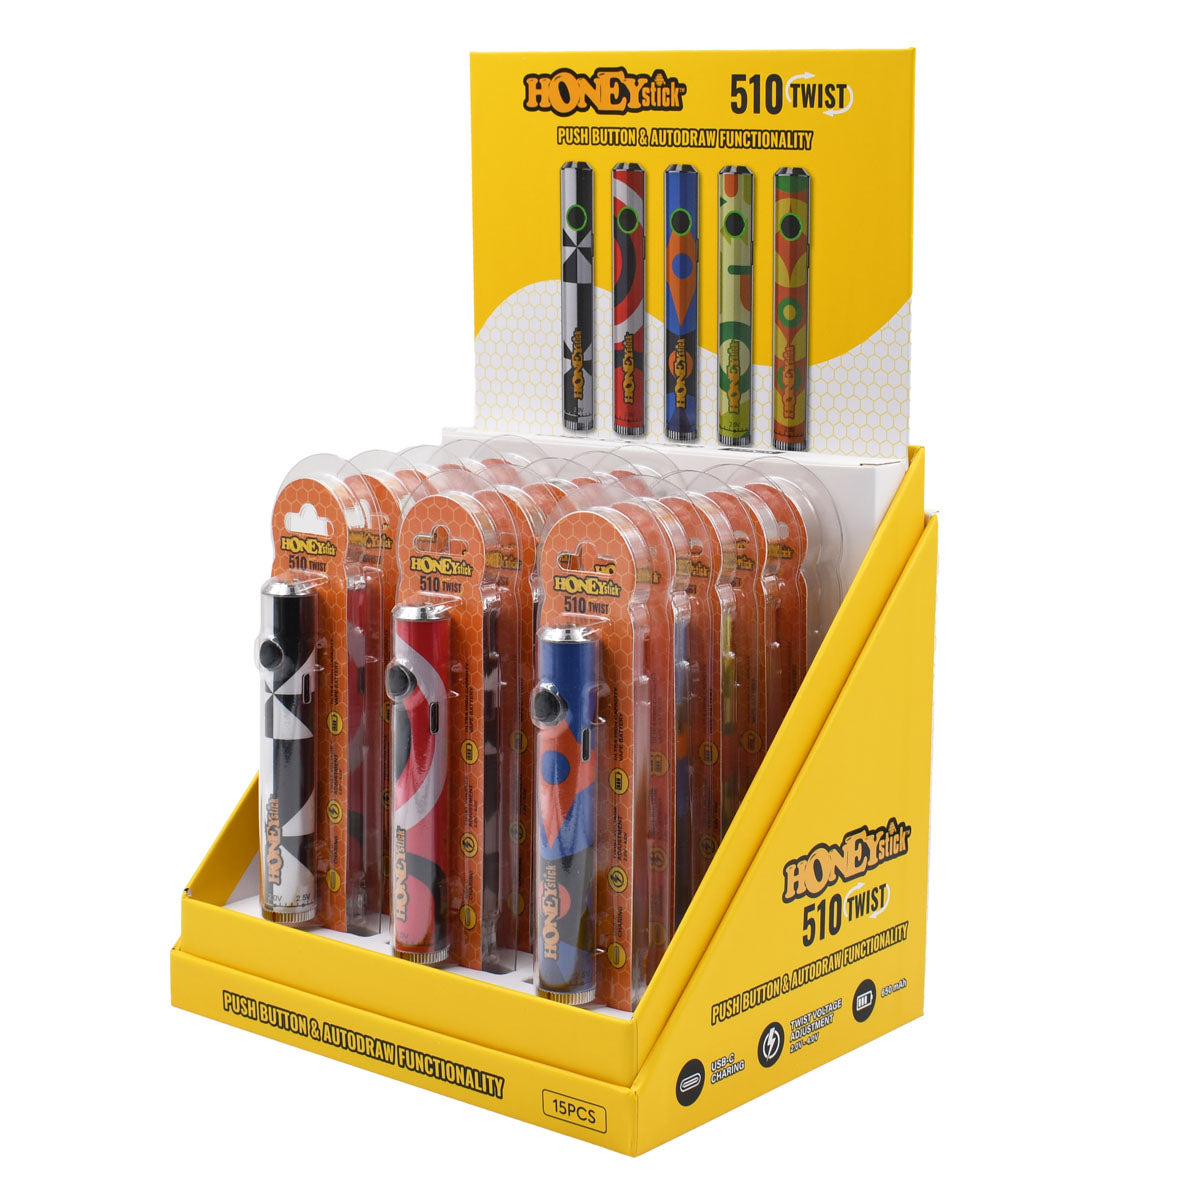 510 Twist Cartridge Battery - Push-Button and AutoDraw Action